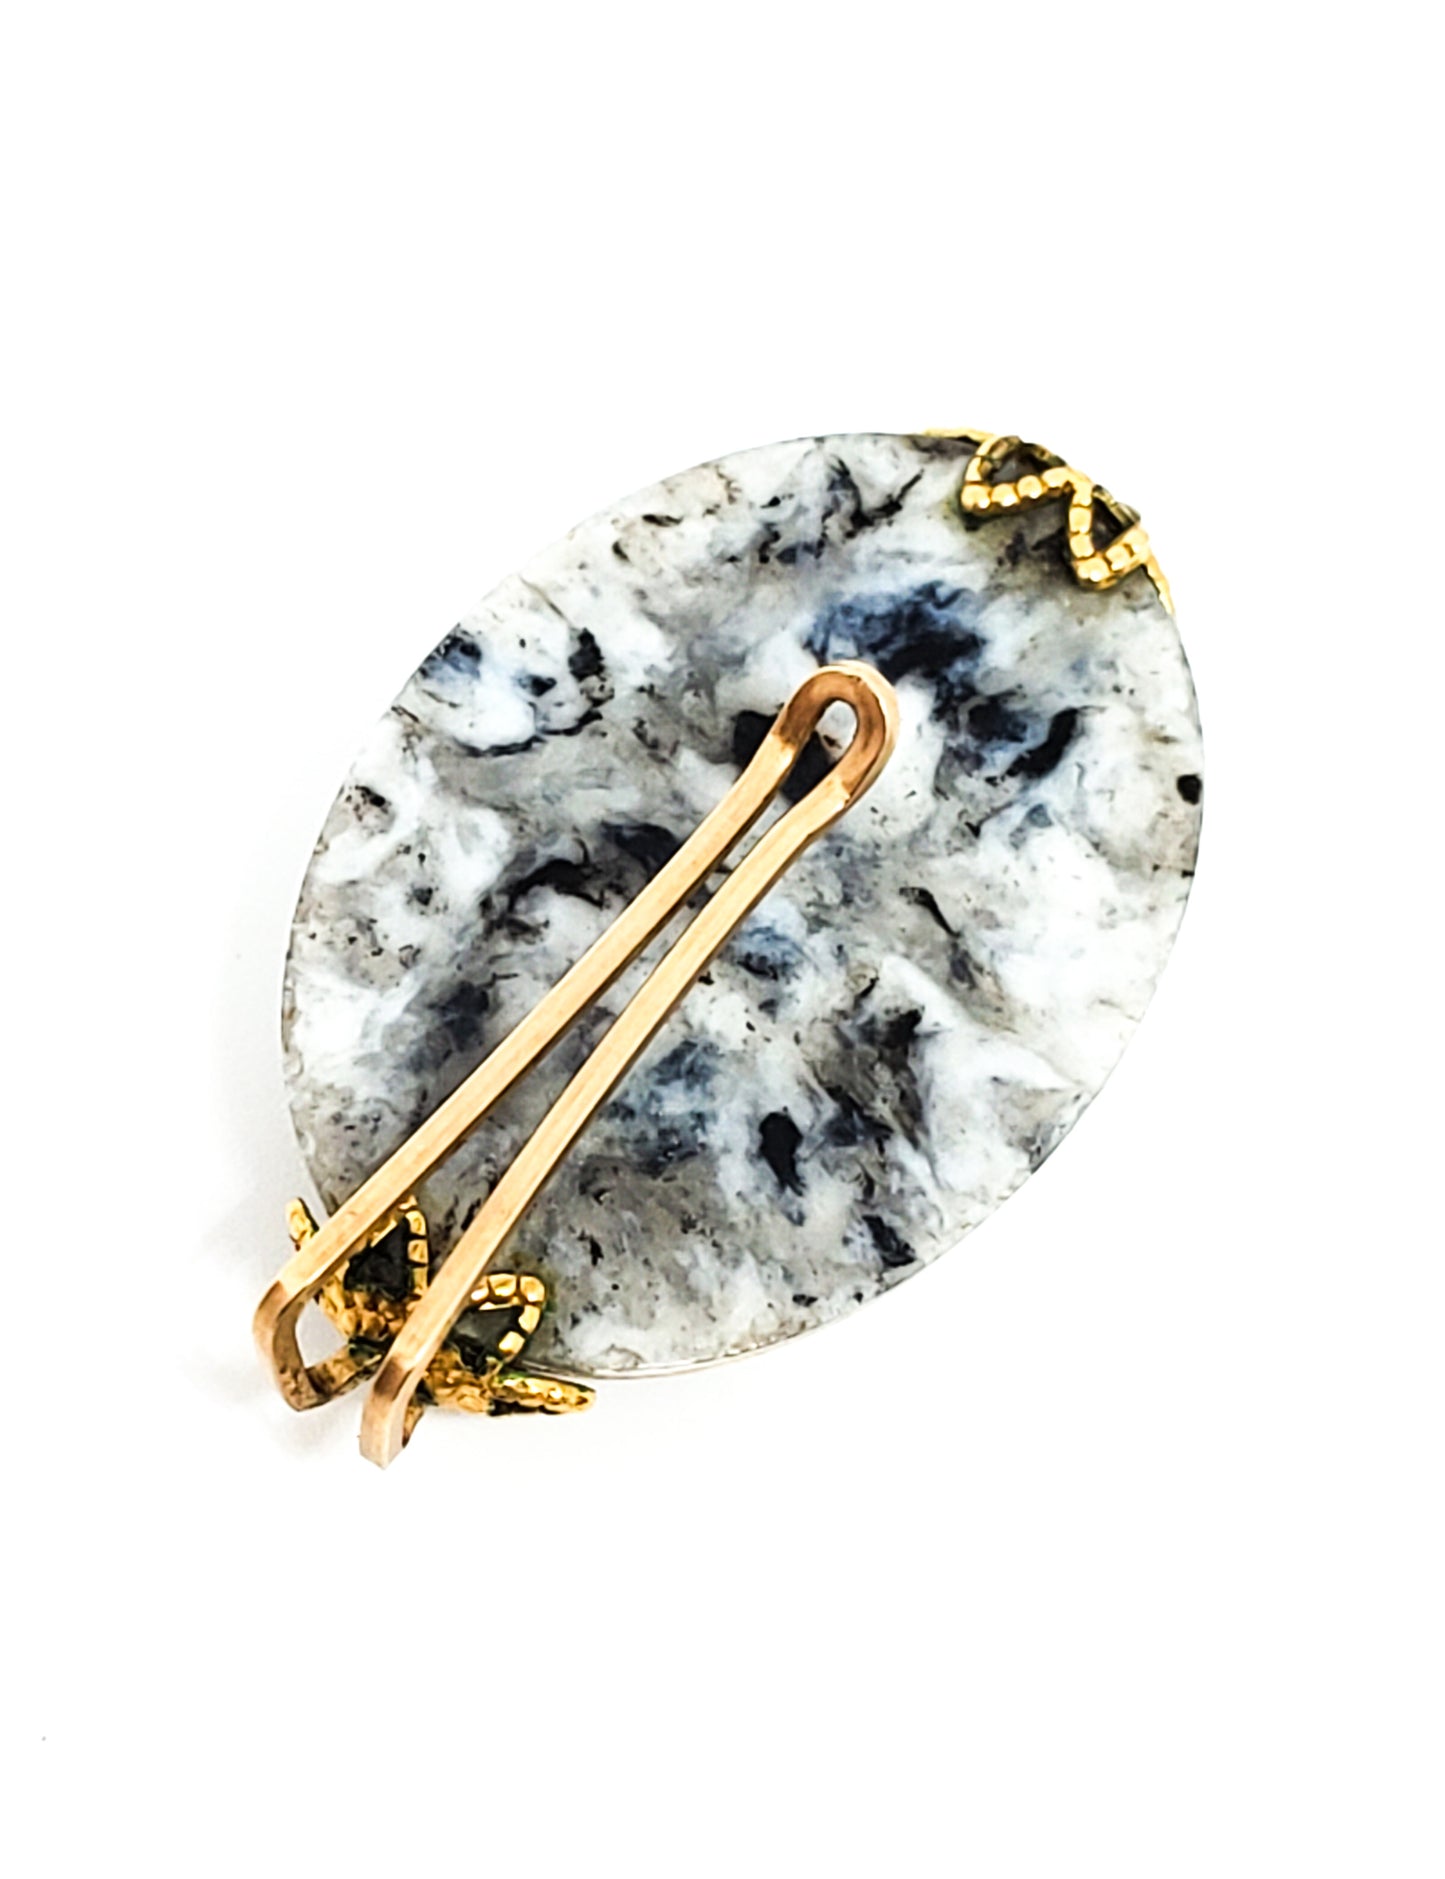 Artisan black and white marbled lucite gold filled wire wrapped vintage tie clip